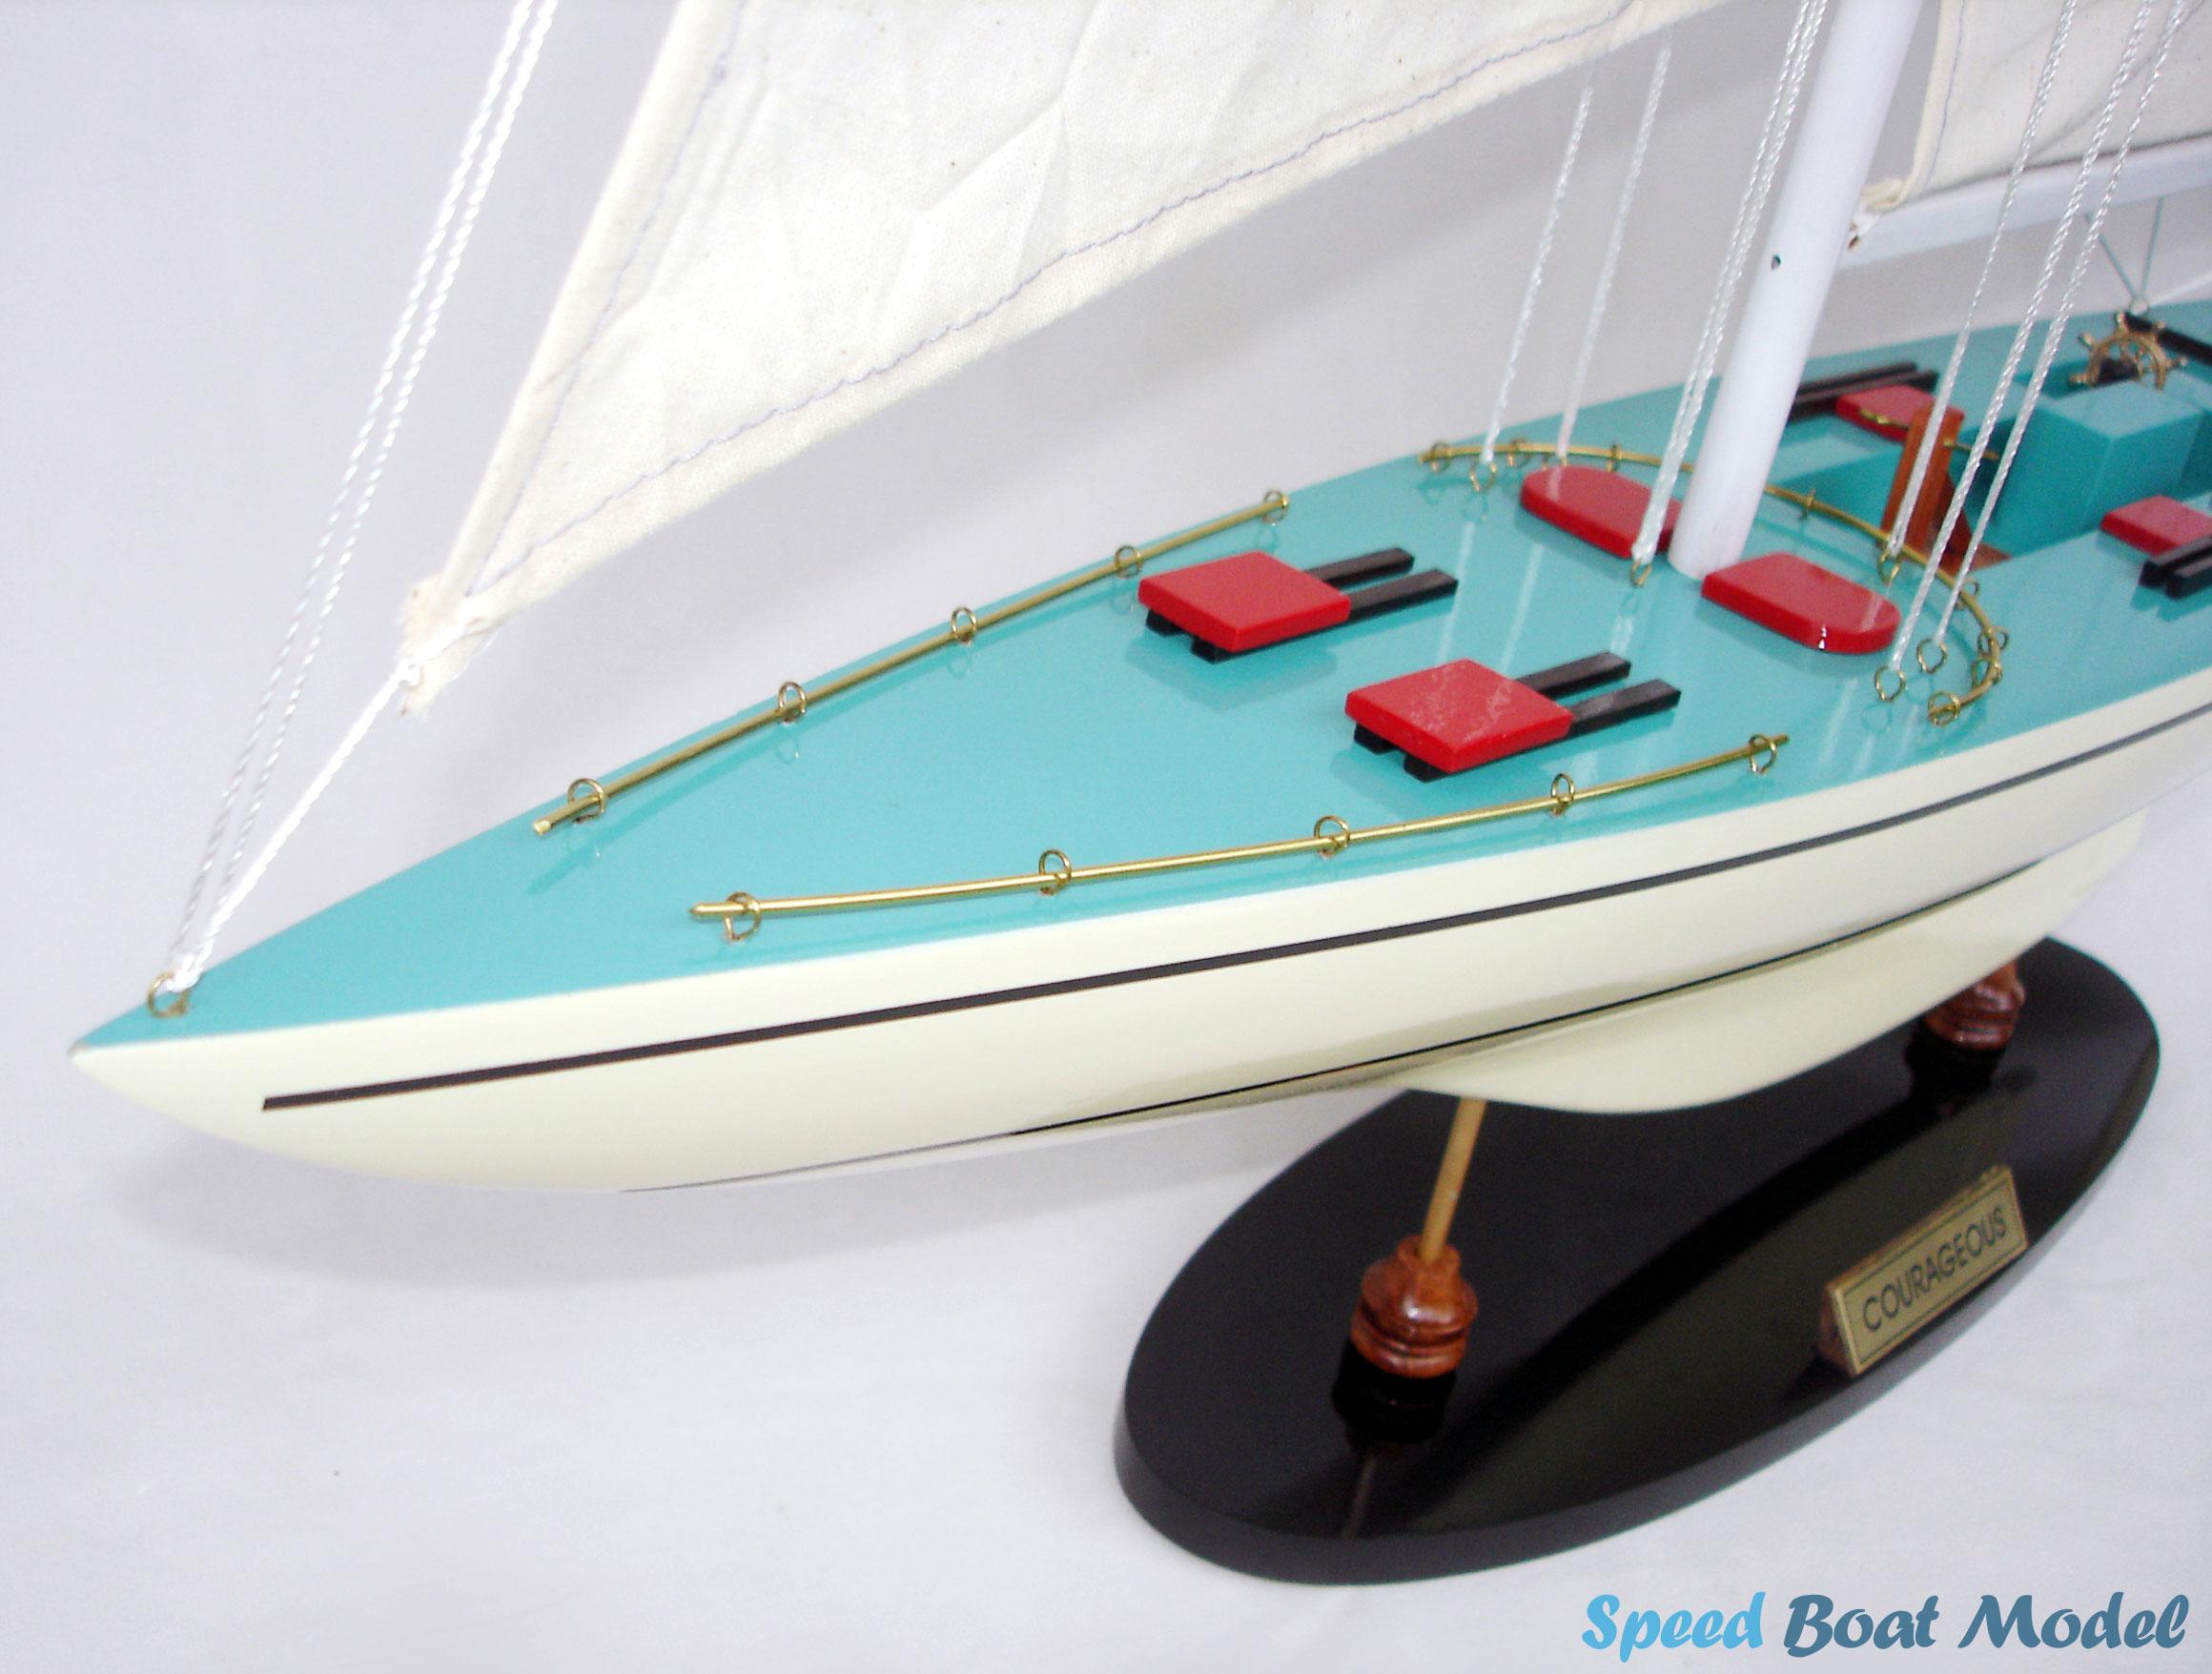 Courageous Painted Sailing Boat Model